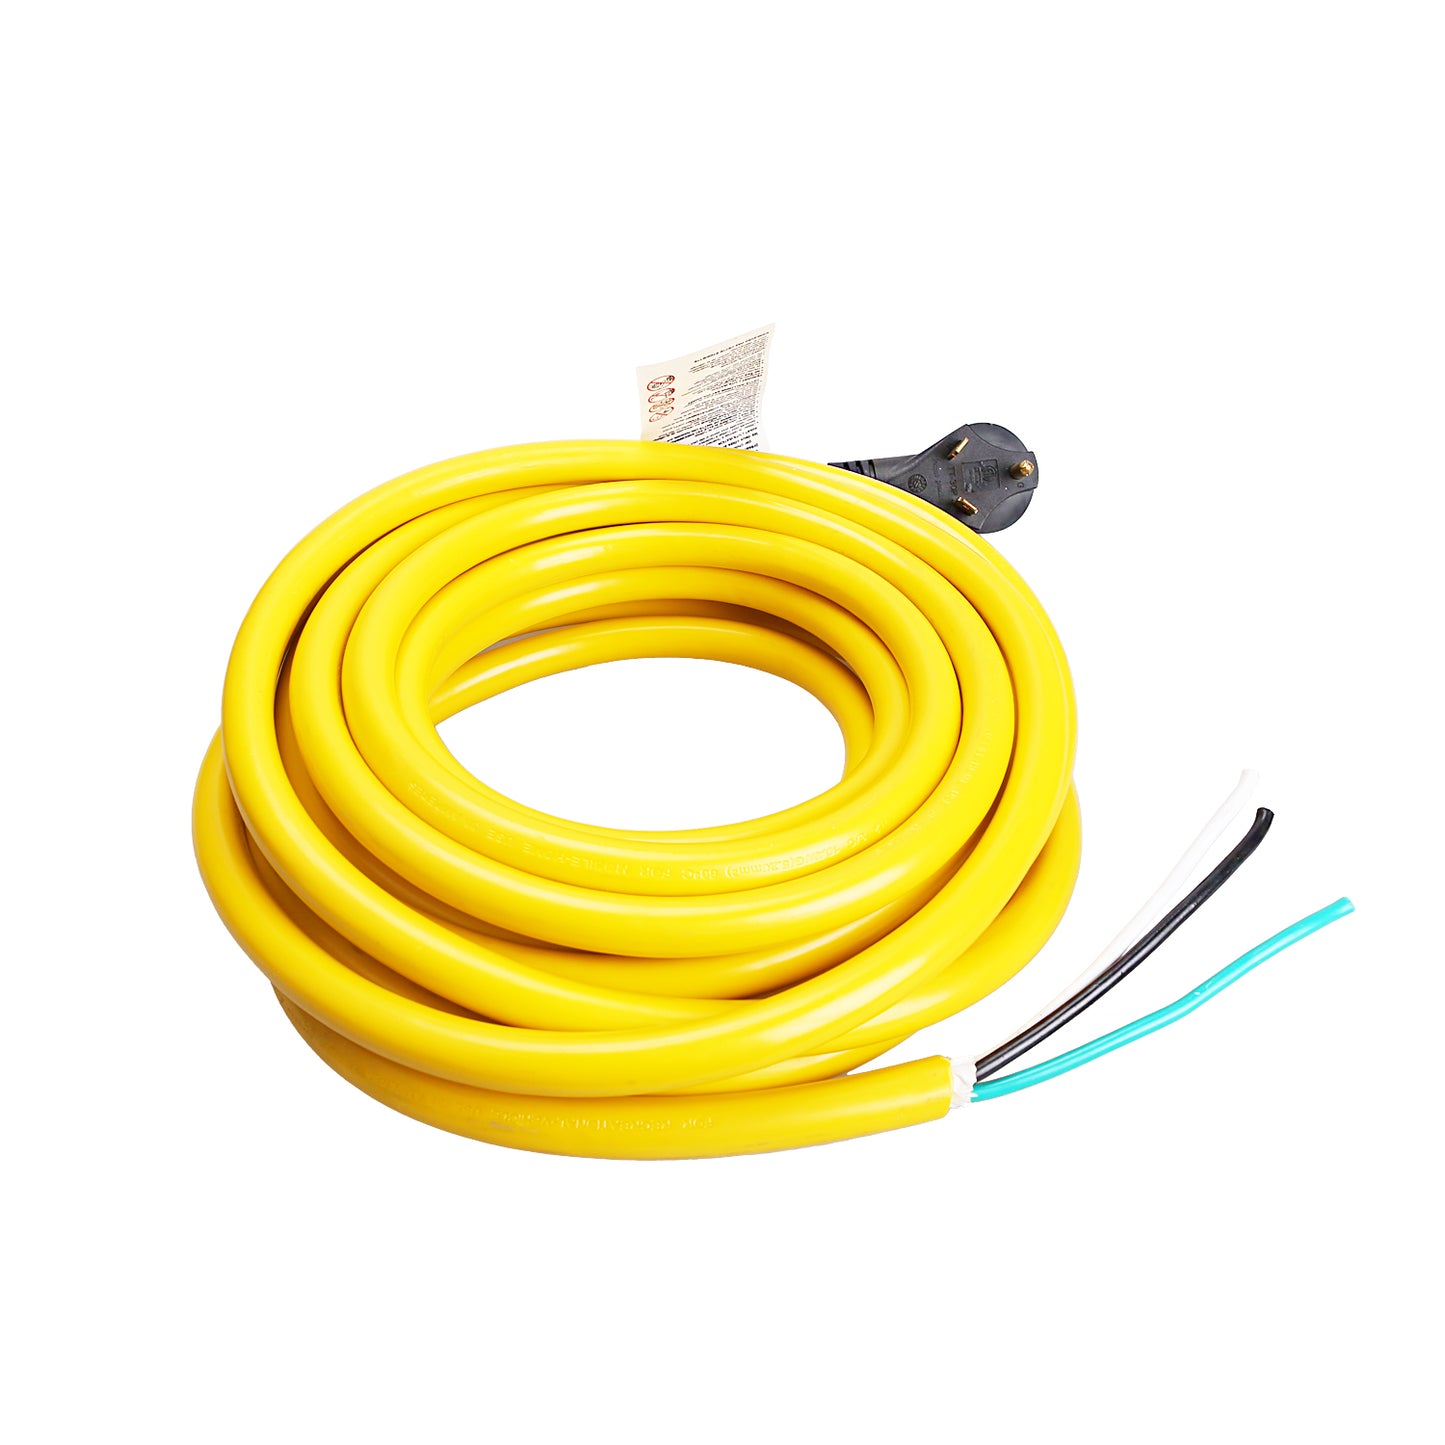  30A RV extension cord loose end trekpower